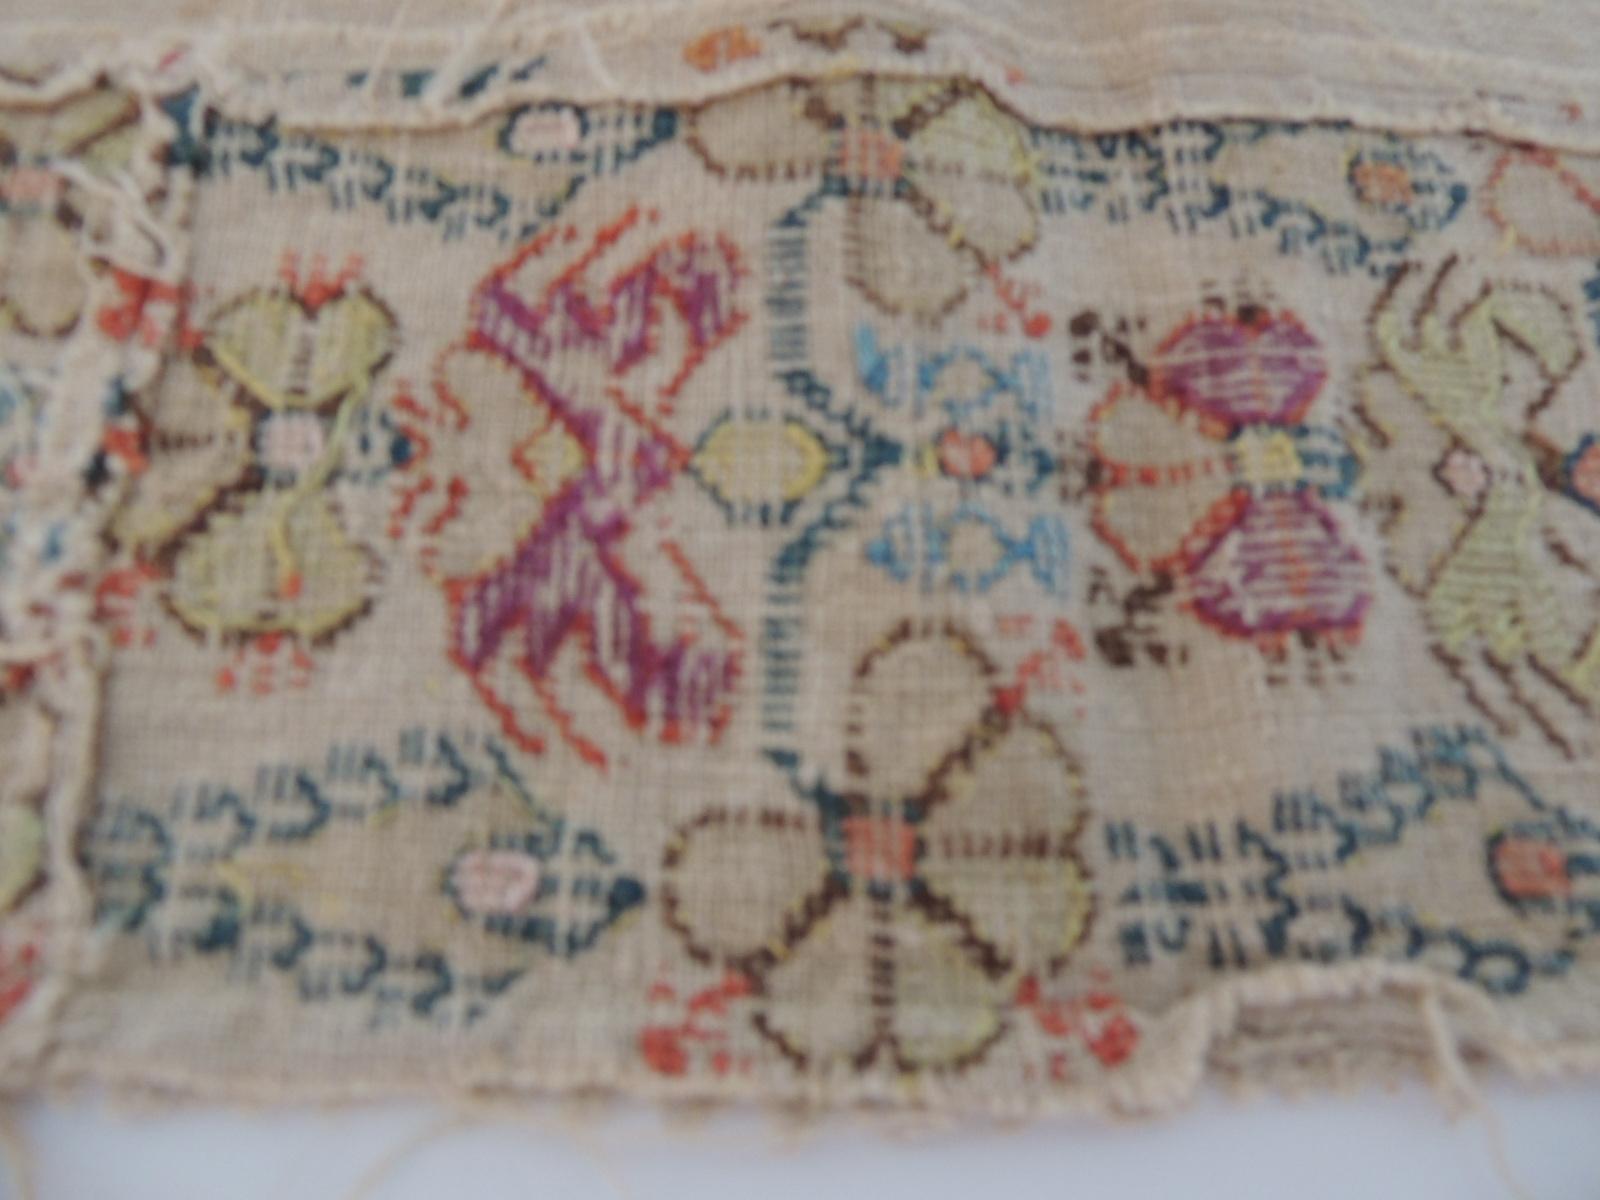 Hand-Crafted Antique Embroidered Turkish Textile Fragment